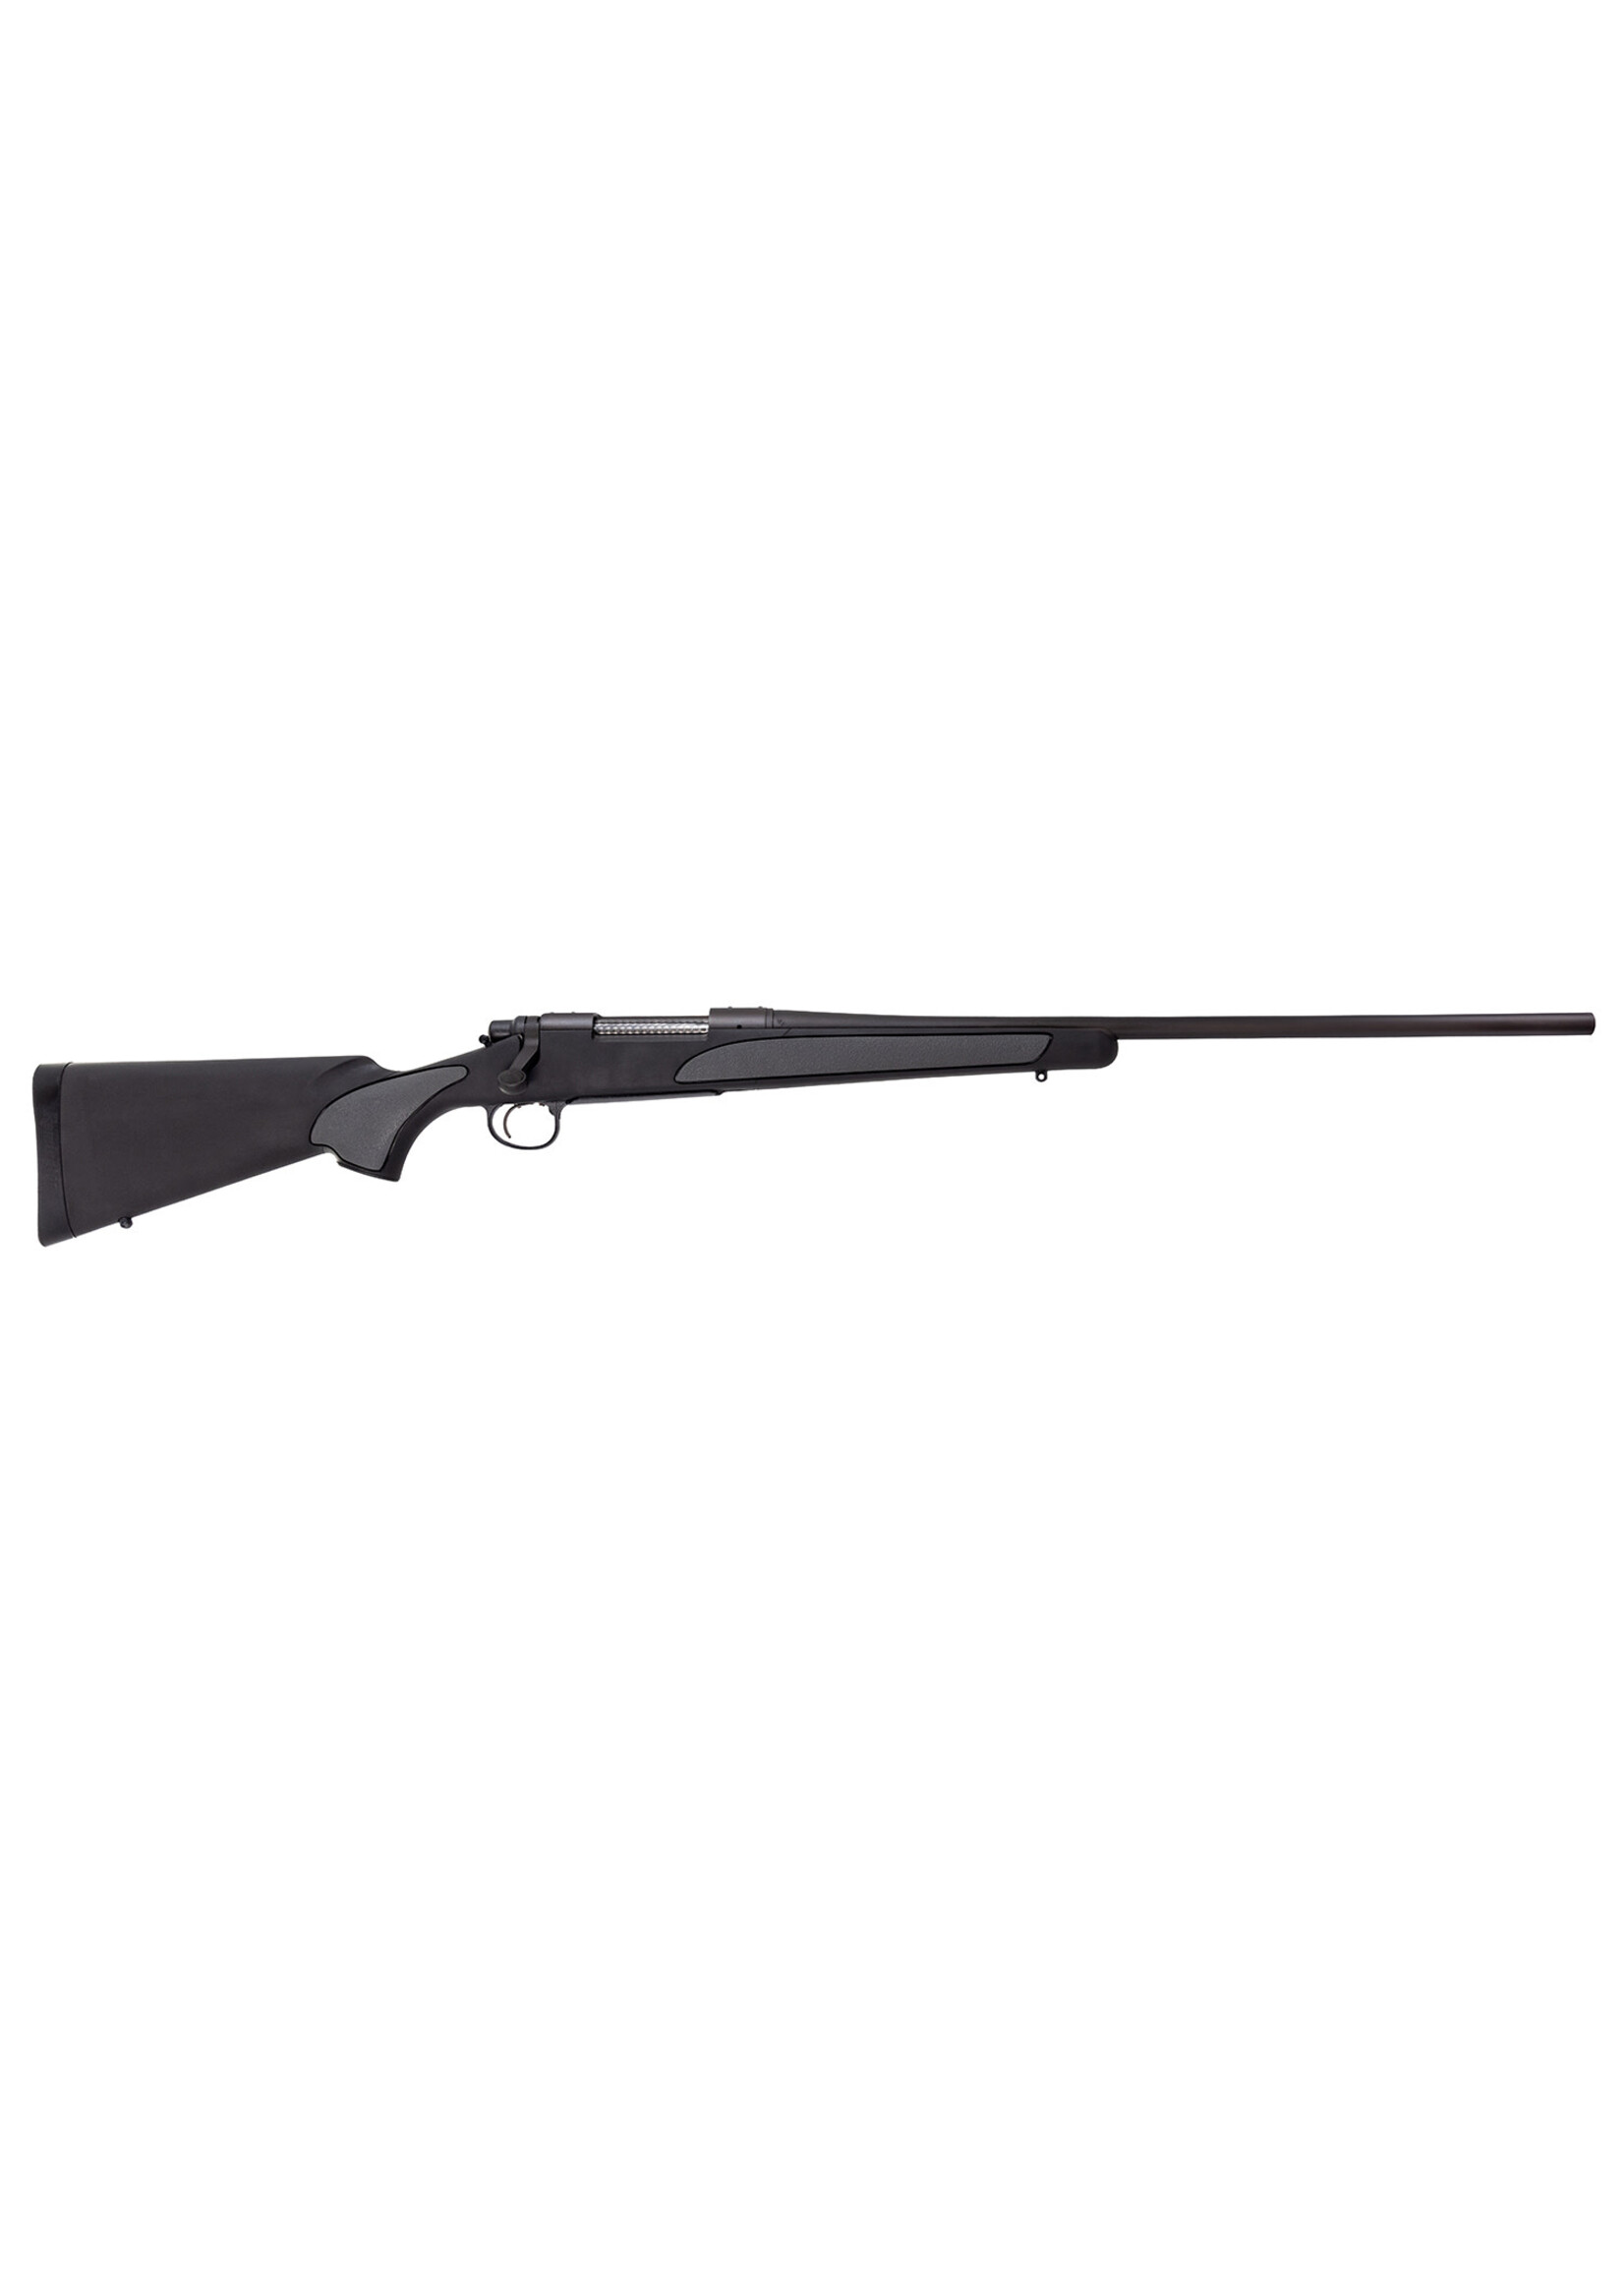 Remington Remington Firearms R27363 700 SPS Full Size 30-06 Springfield 4+1 24" Matte Blued Steel Barrel & Receiver, Matte Black w/Gray Panels Fixed Synthetic Stock, Right Hand